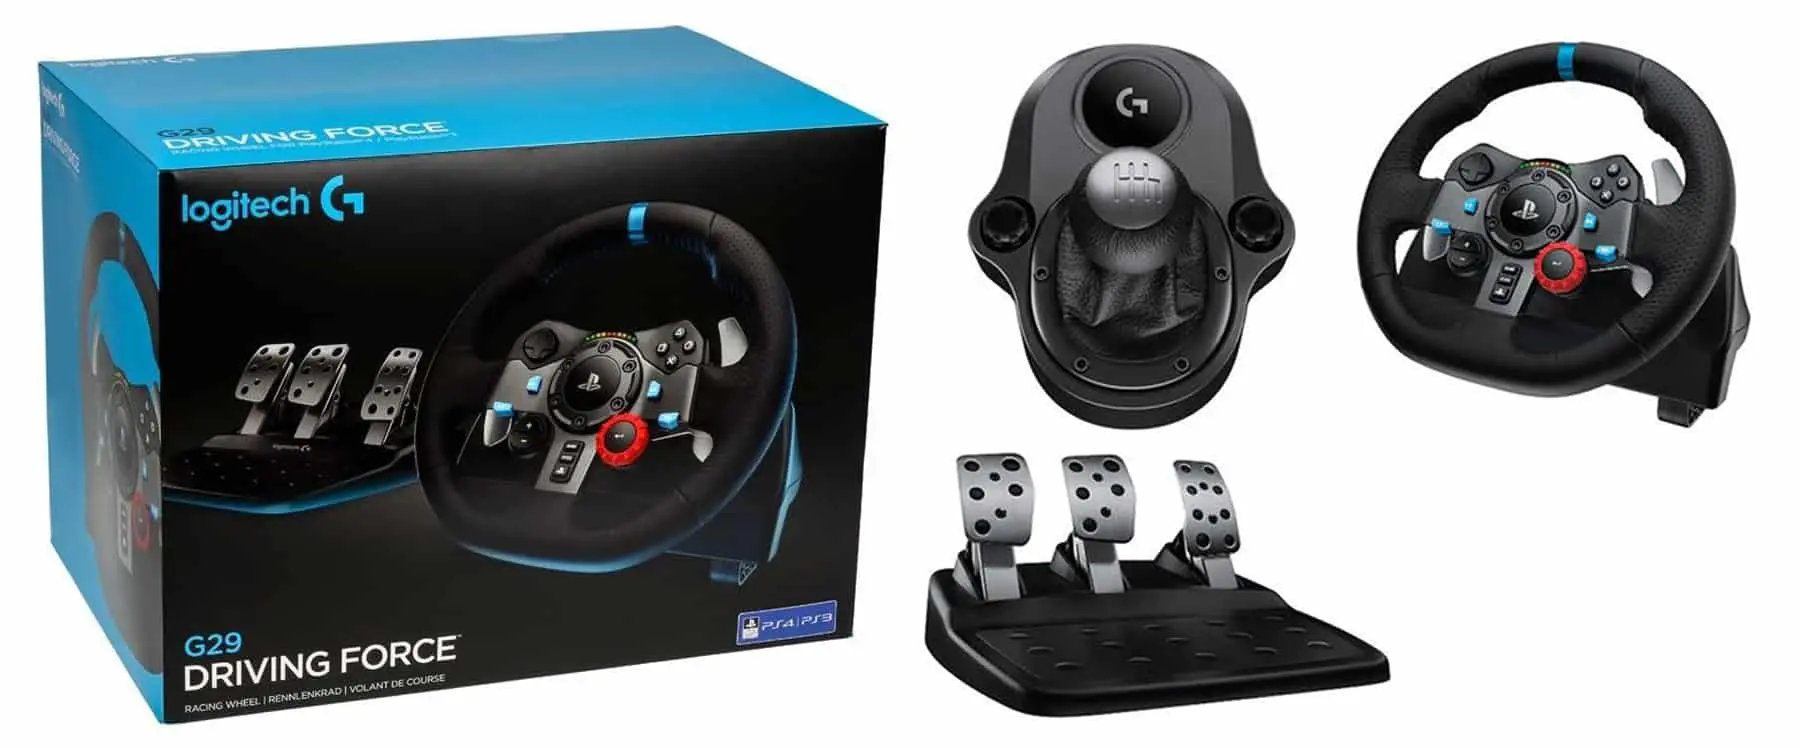 The Logitech G29 Racing Review: Is it Still Worth